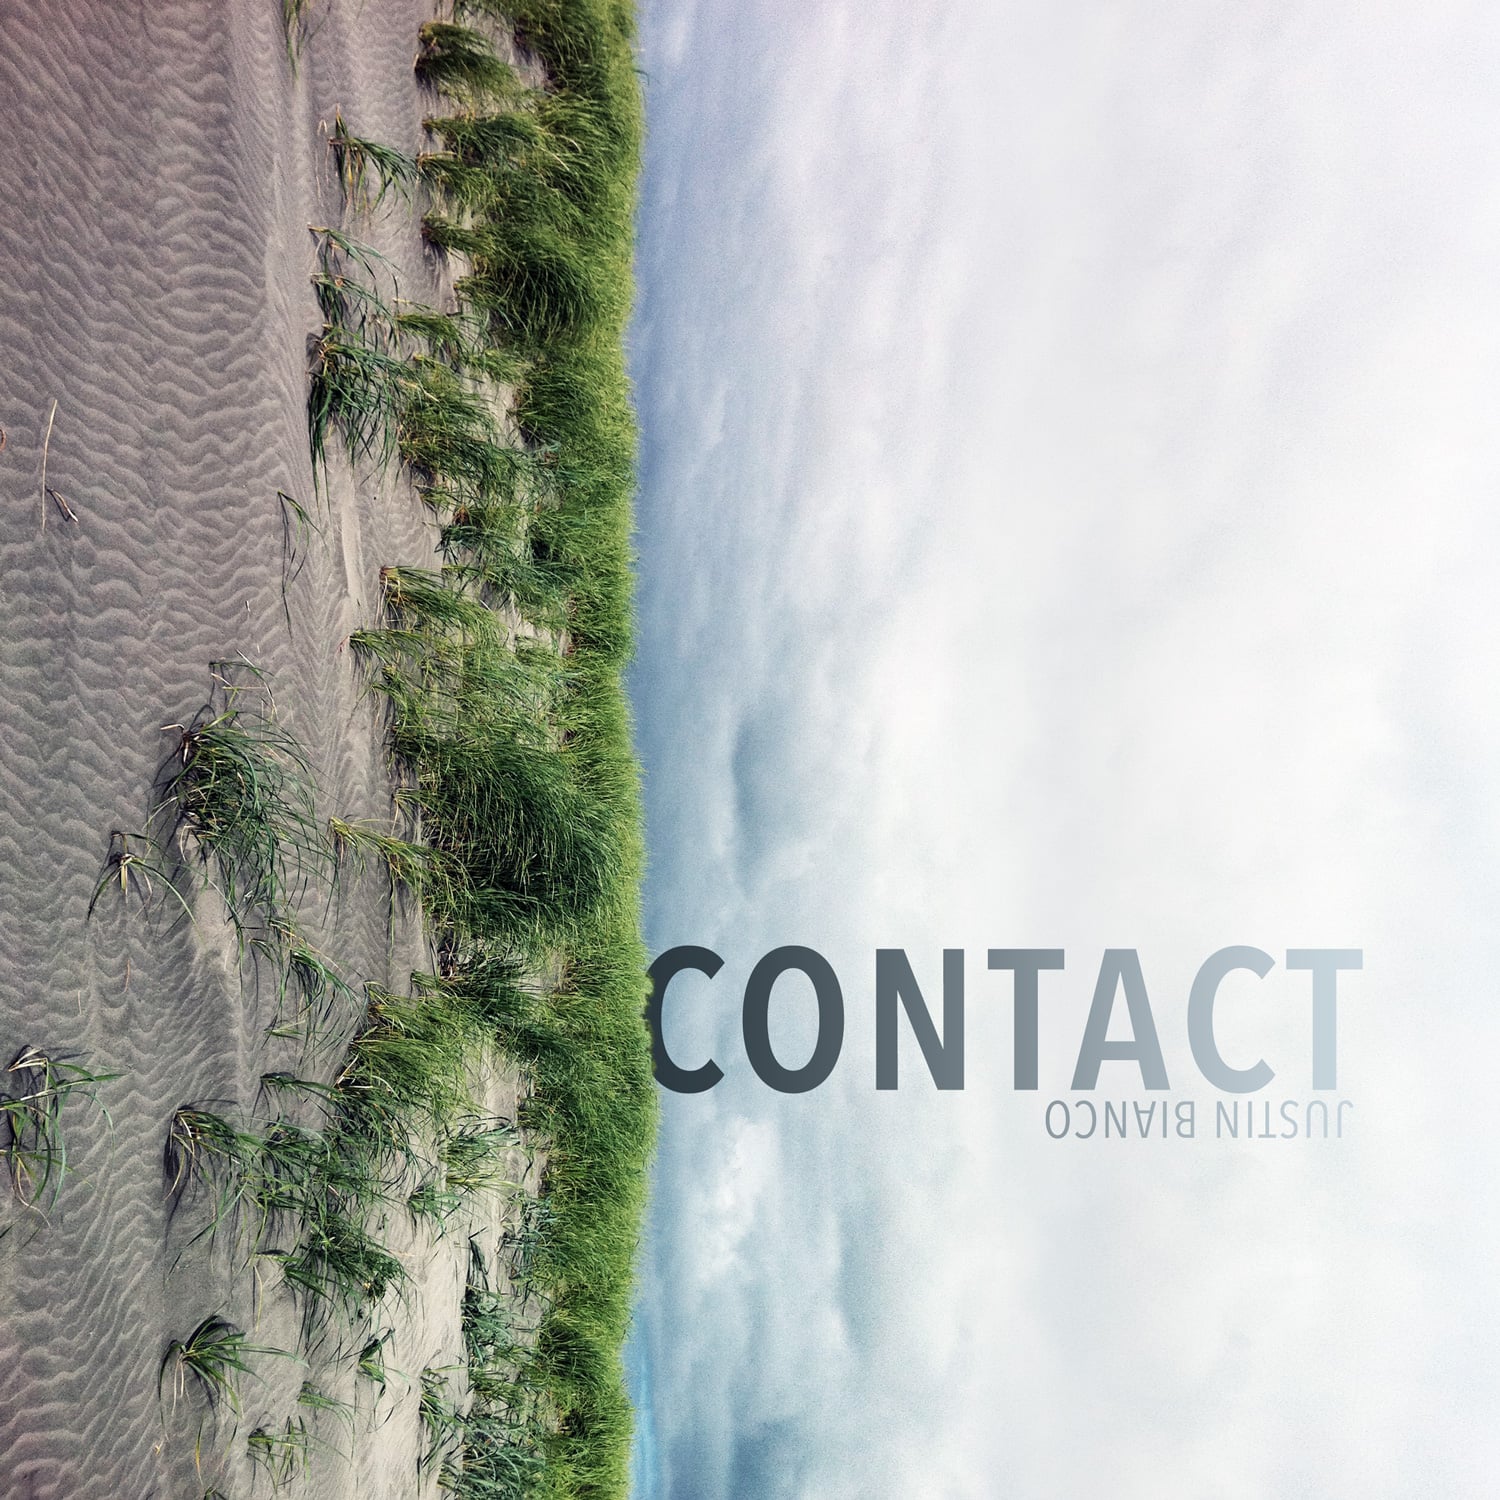 Contact (2013)